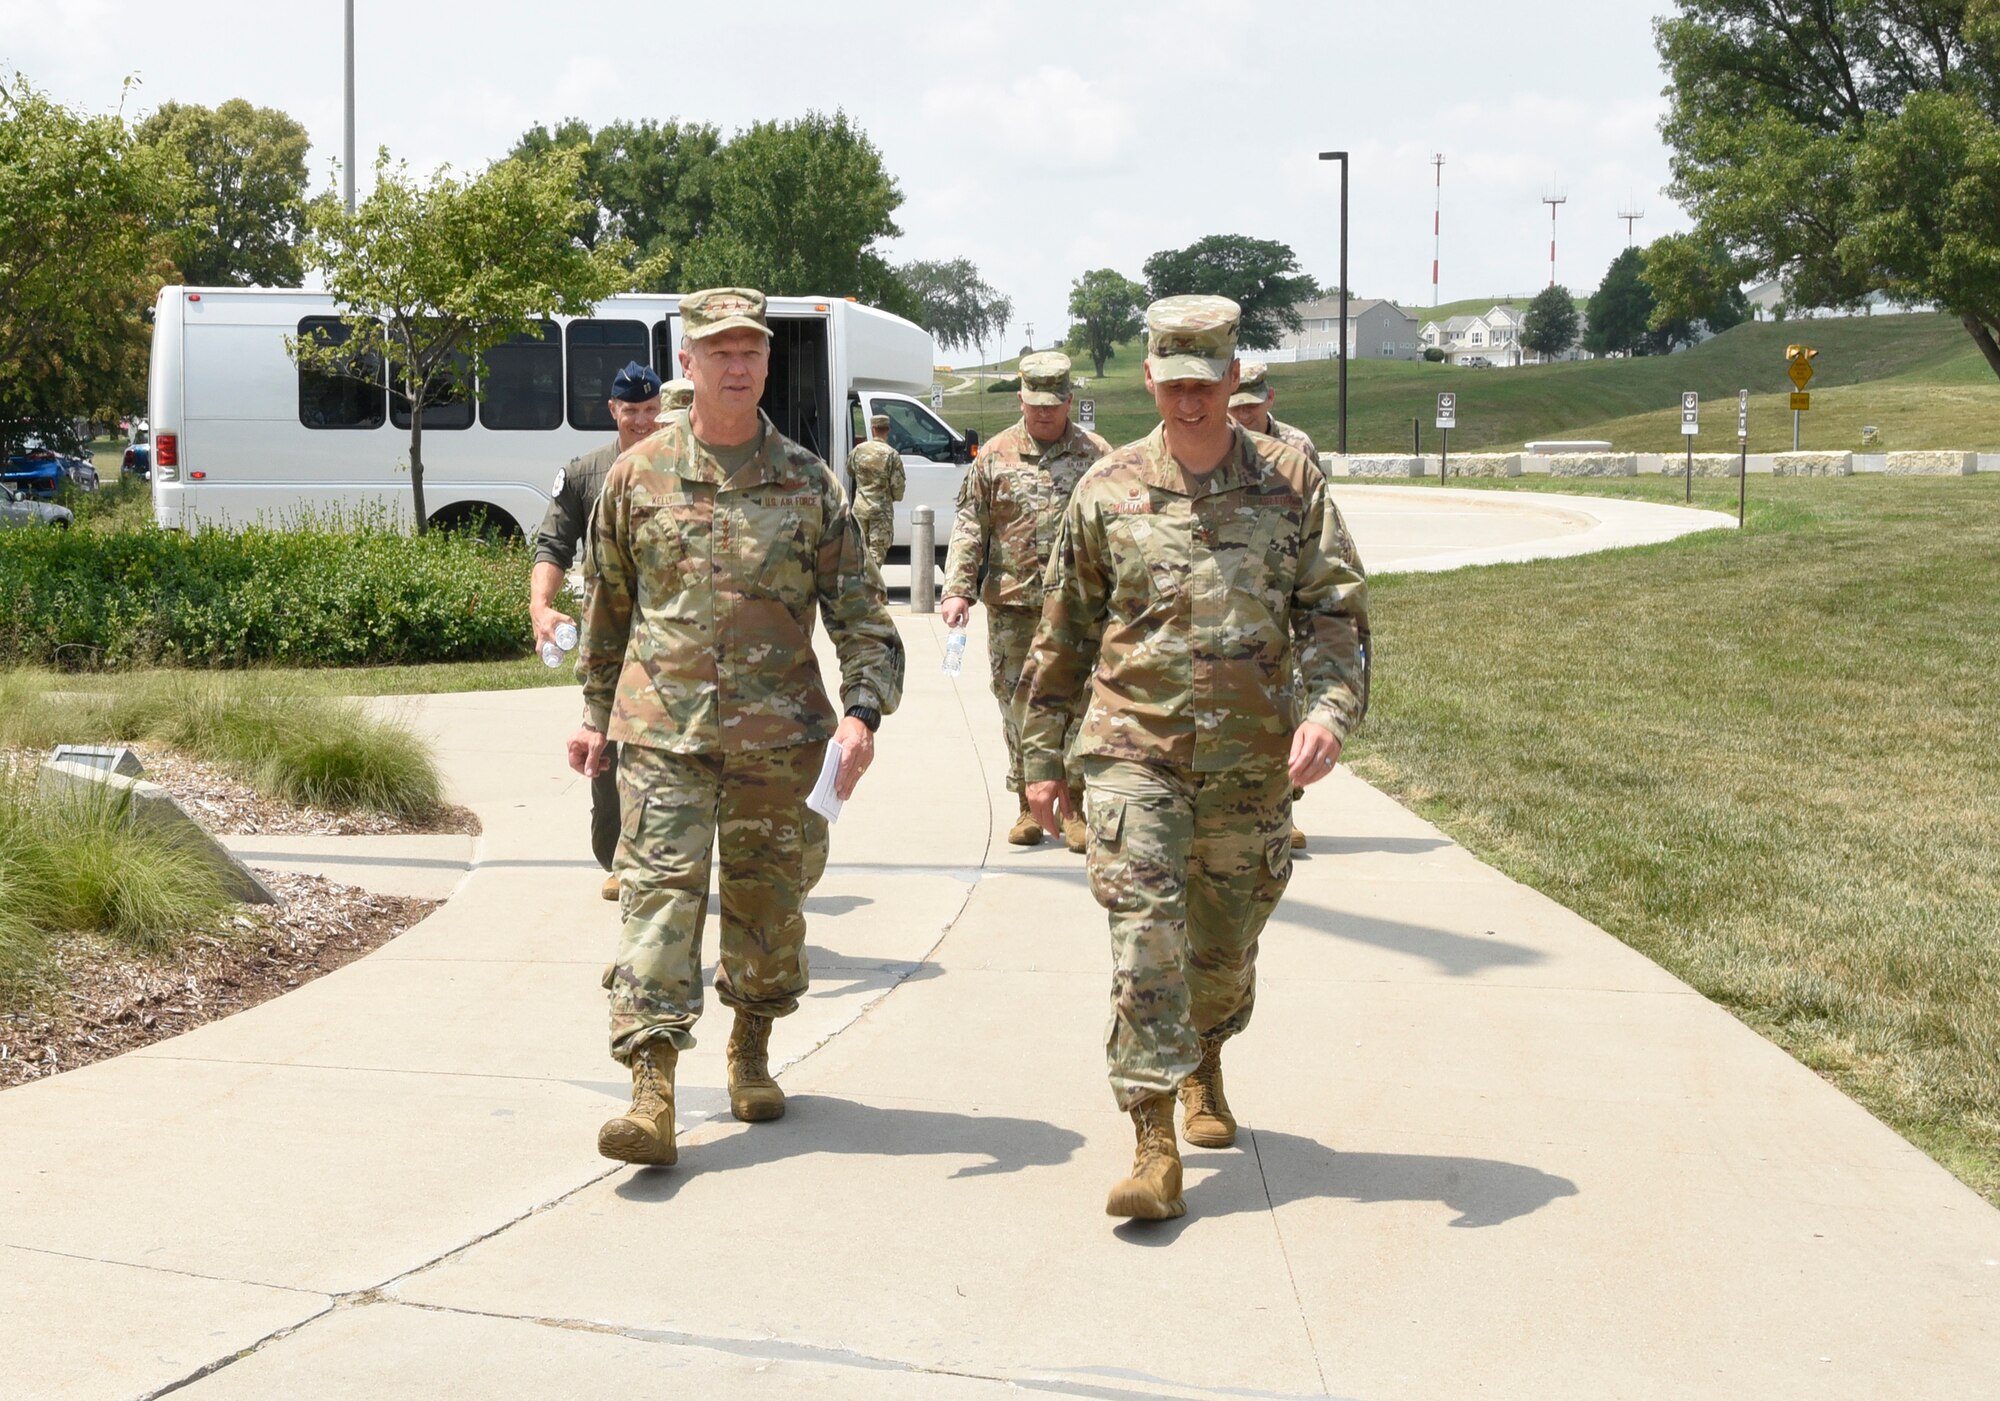 Gen. Mark Kelly, commander of Air Combat Command, walks alongside Col. Patrick Williams, 557th Weather Wing commander, as they approach the 557th WW headquarters building at Offutt Air Force Base, Nebraska on July 21, 2021.